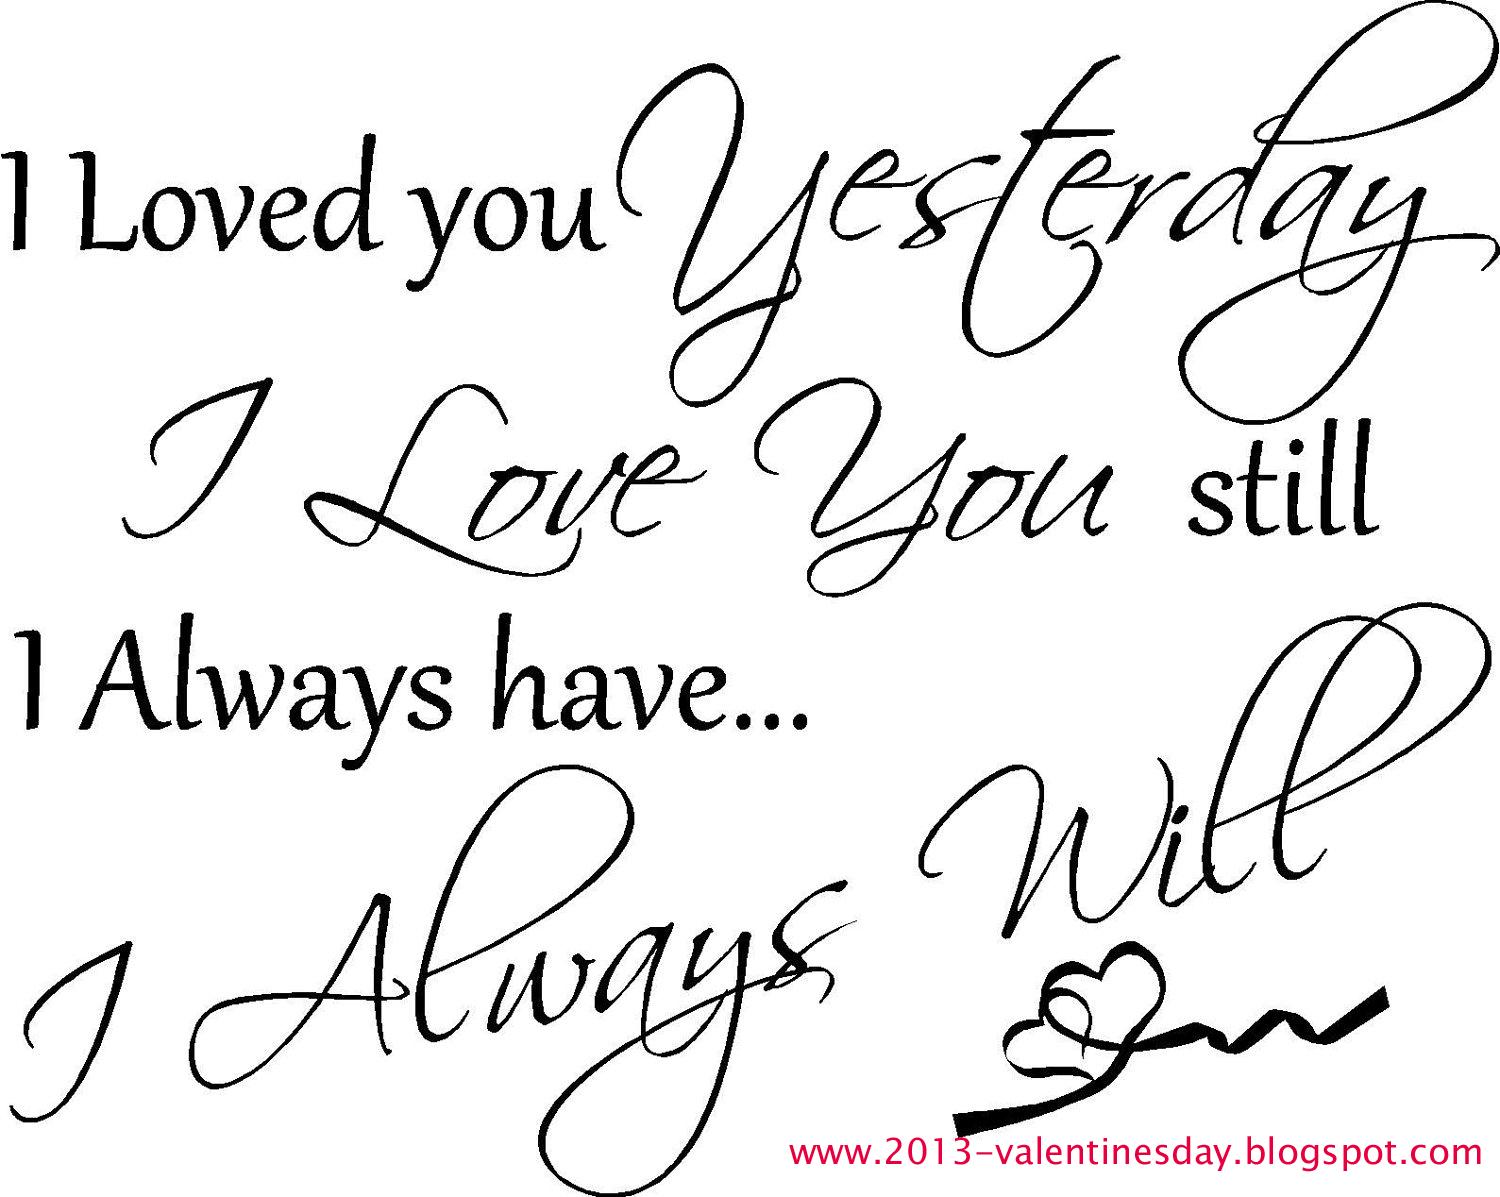 Miss U Sister Wallpaper, image collections of wallpaper